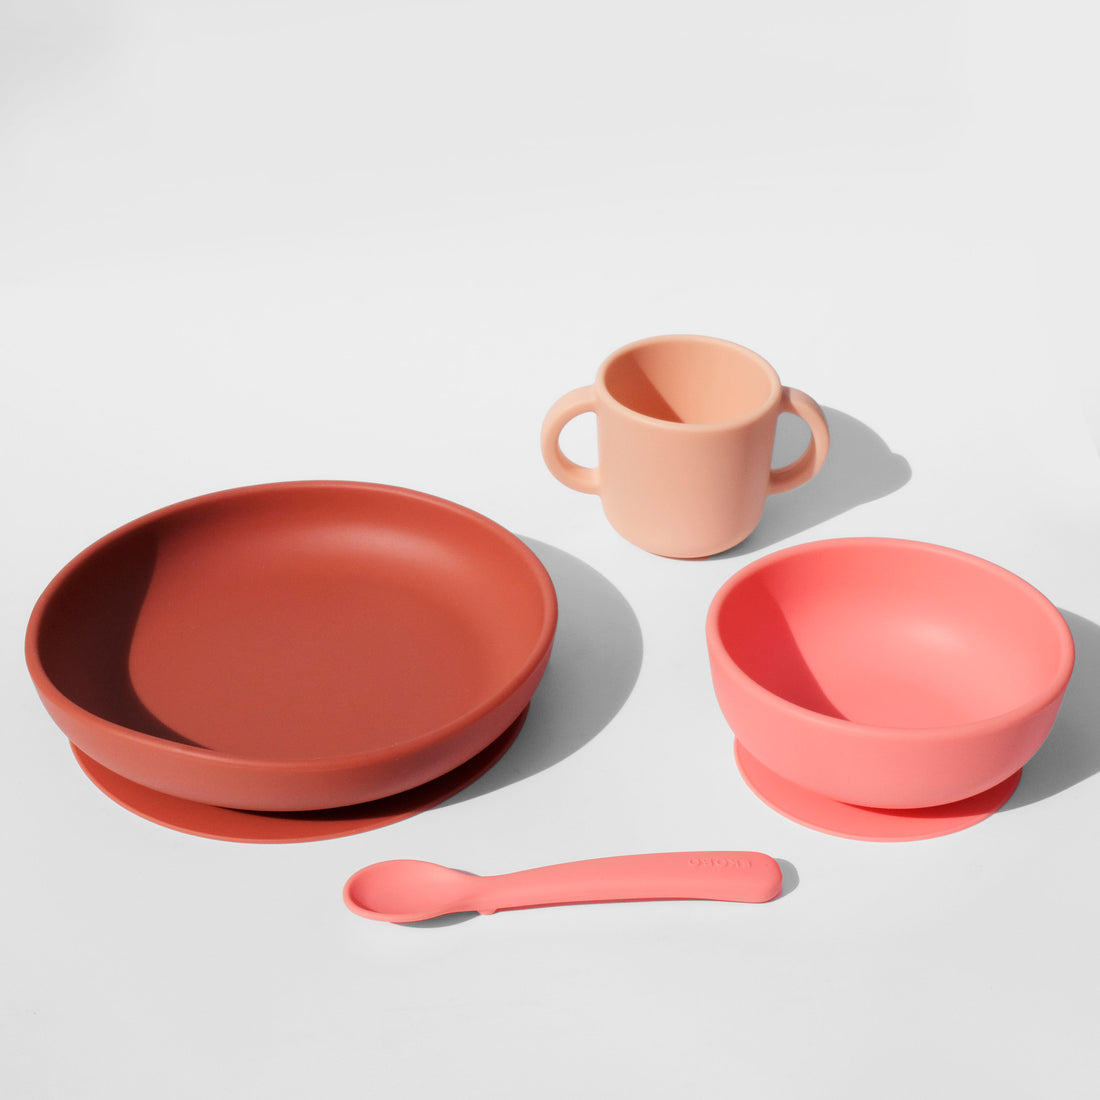 Silicone Baby Meal Set